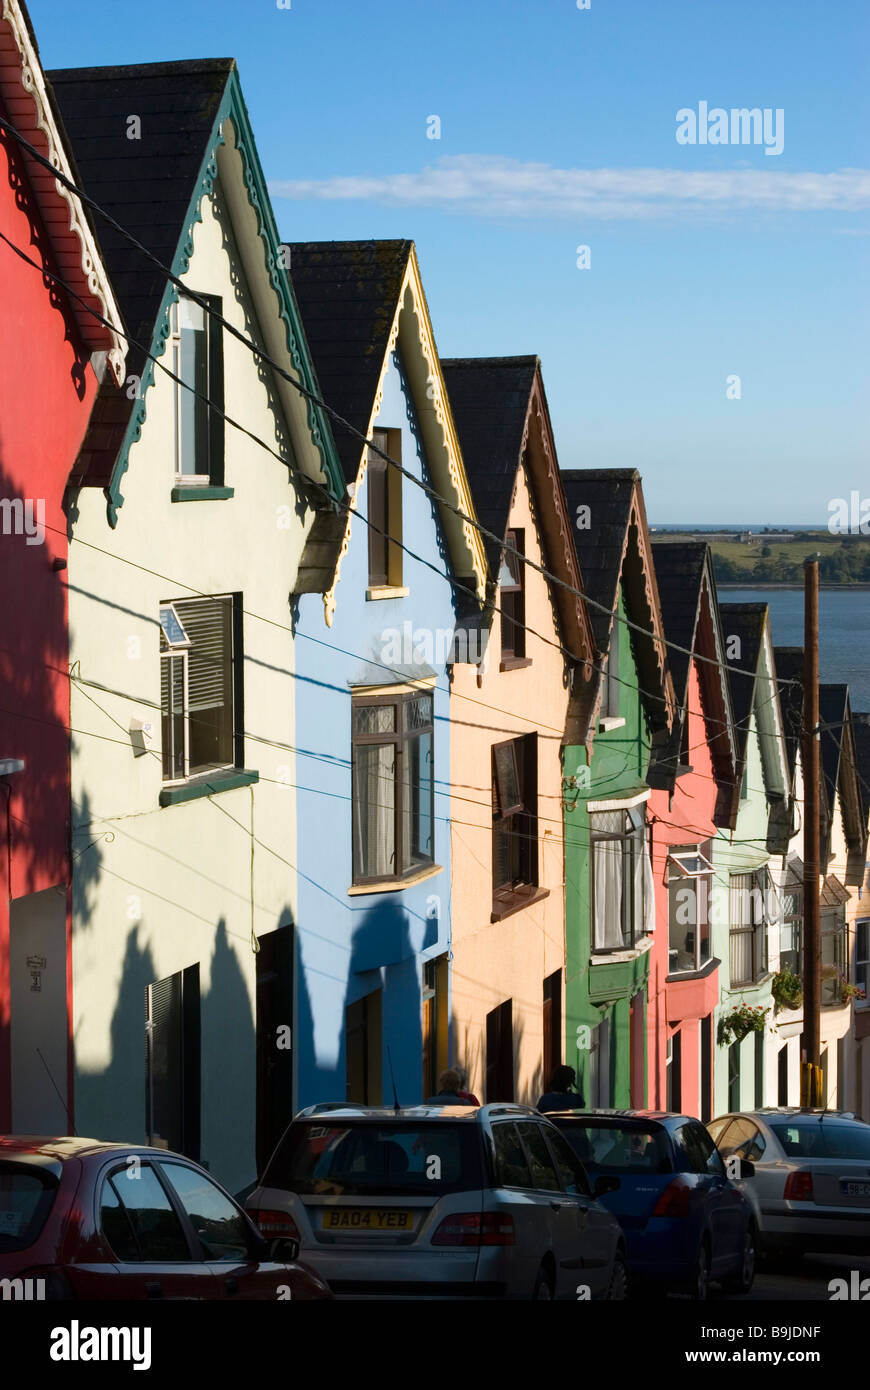 A colourful row of houses known locally as The Deck of Cards are situated on a very steep hill in Cobh, County Cork, Ireland Stock Photo